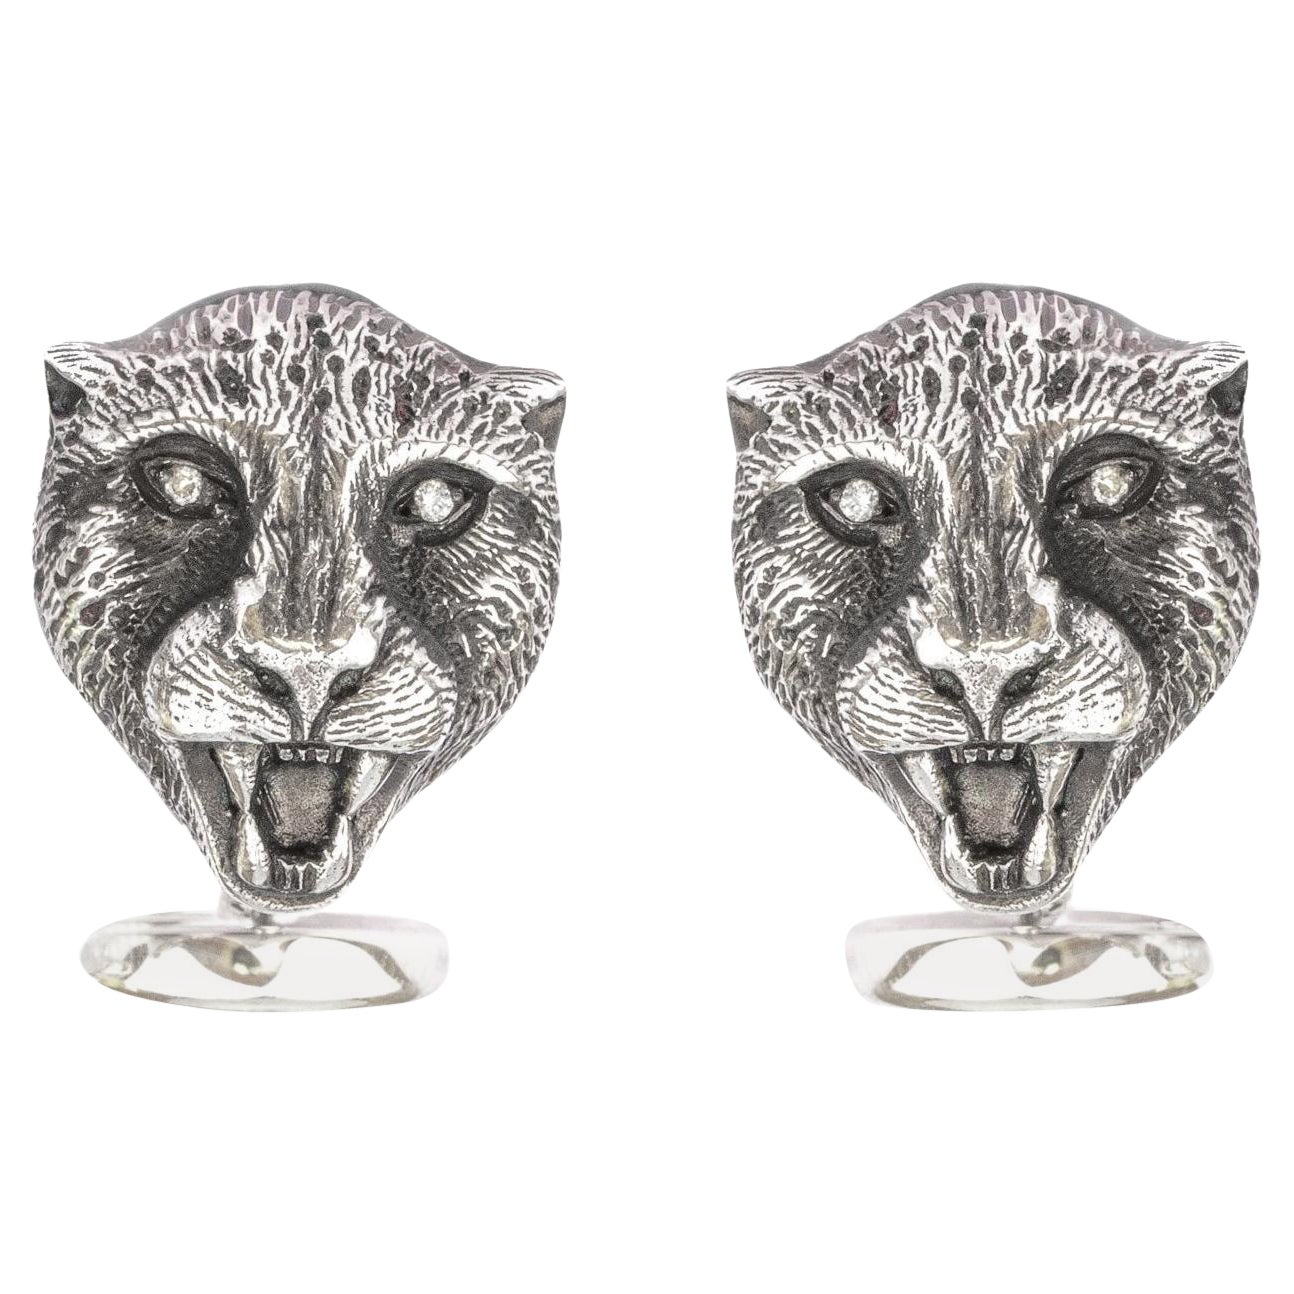 Tichu Diamond and Crystal Quartz Cheetah Face Cufflink in Sterling Silver For Sale